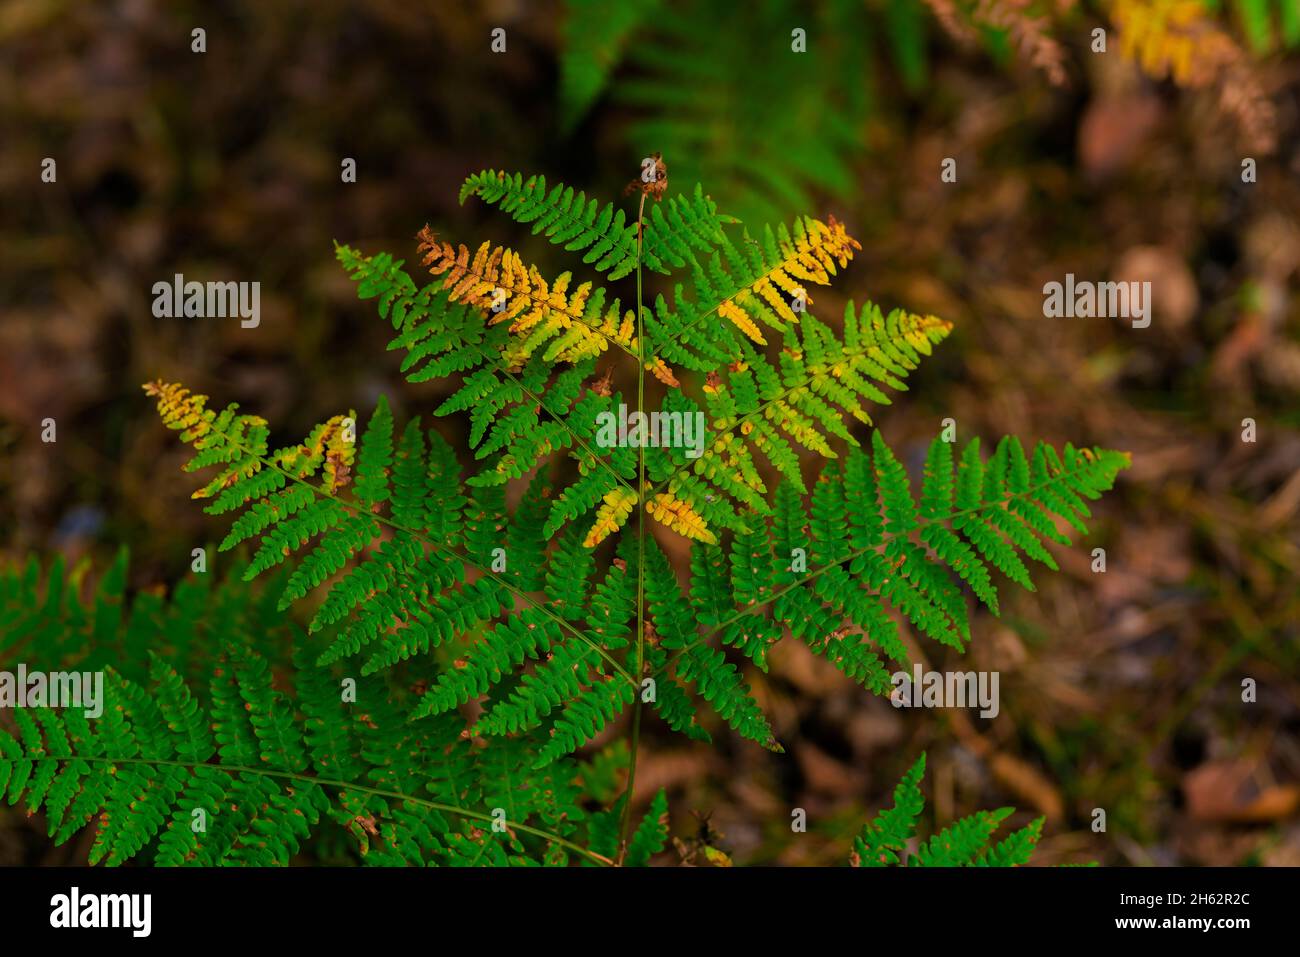 the little autumn,the fern slowly loses its green color,autumn beginning Stock Photo